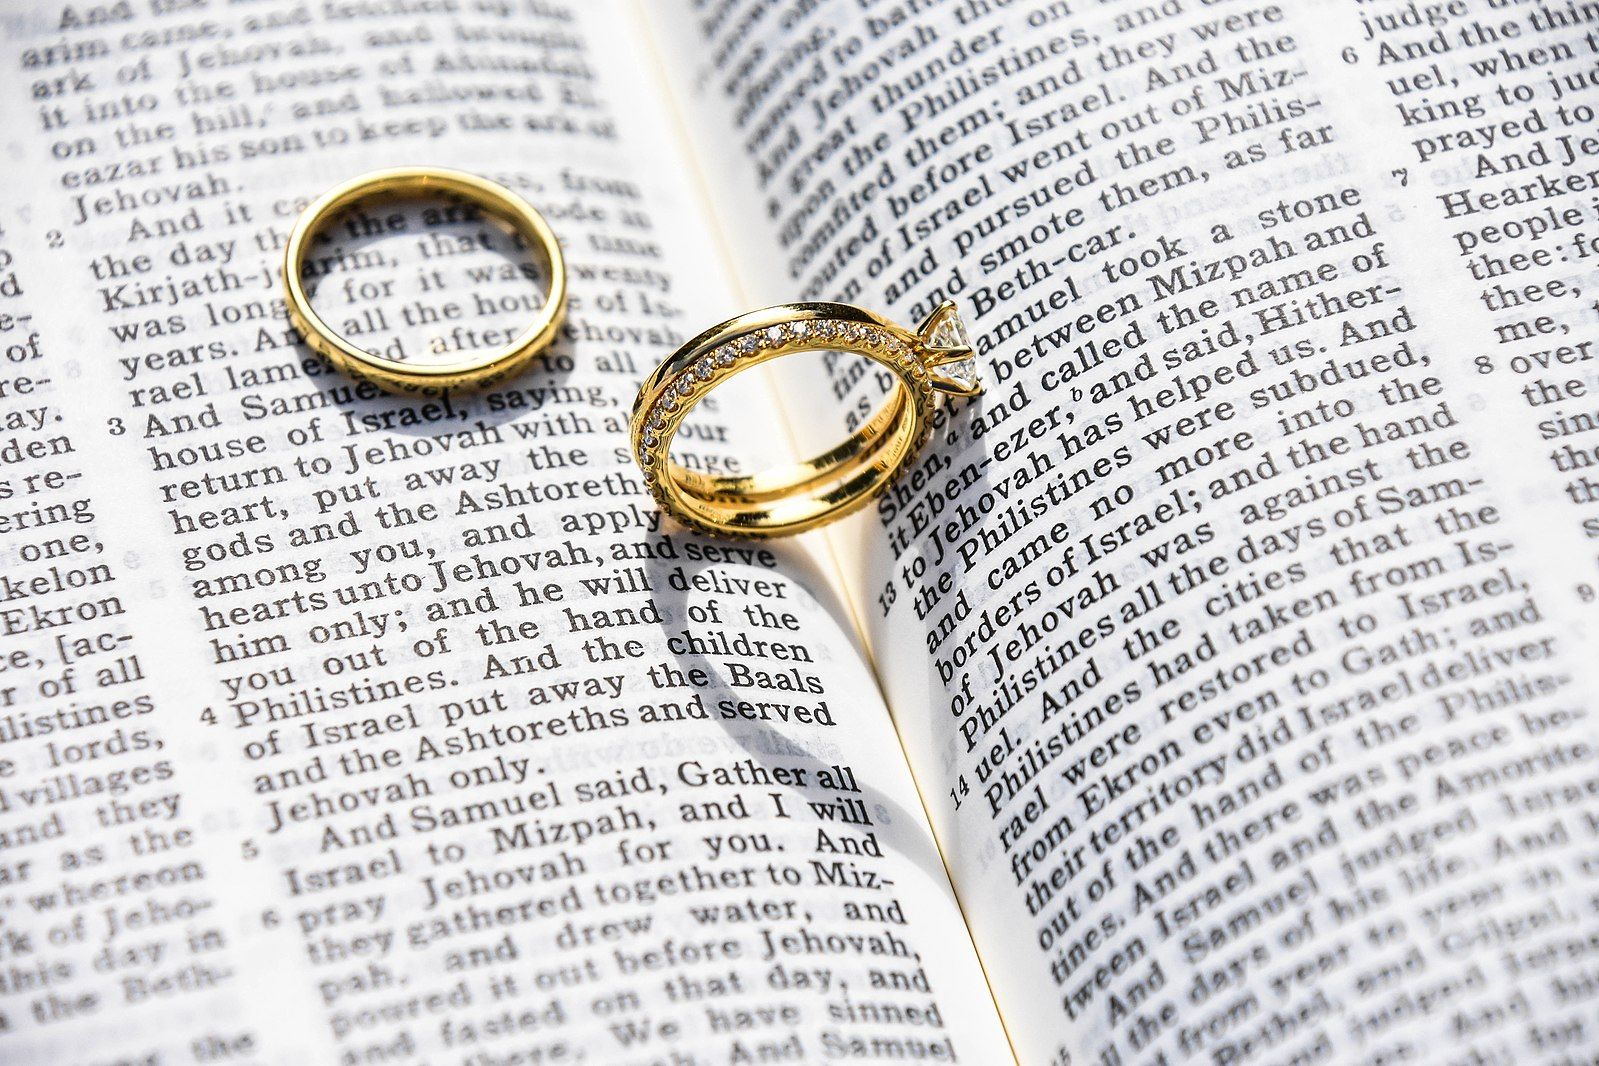 Divorce rate soars, but remains in line with EU average